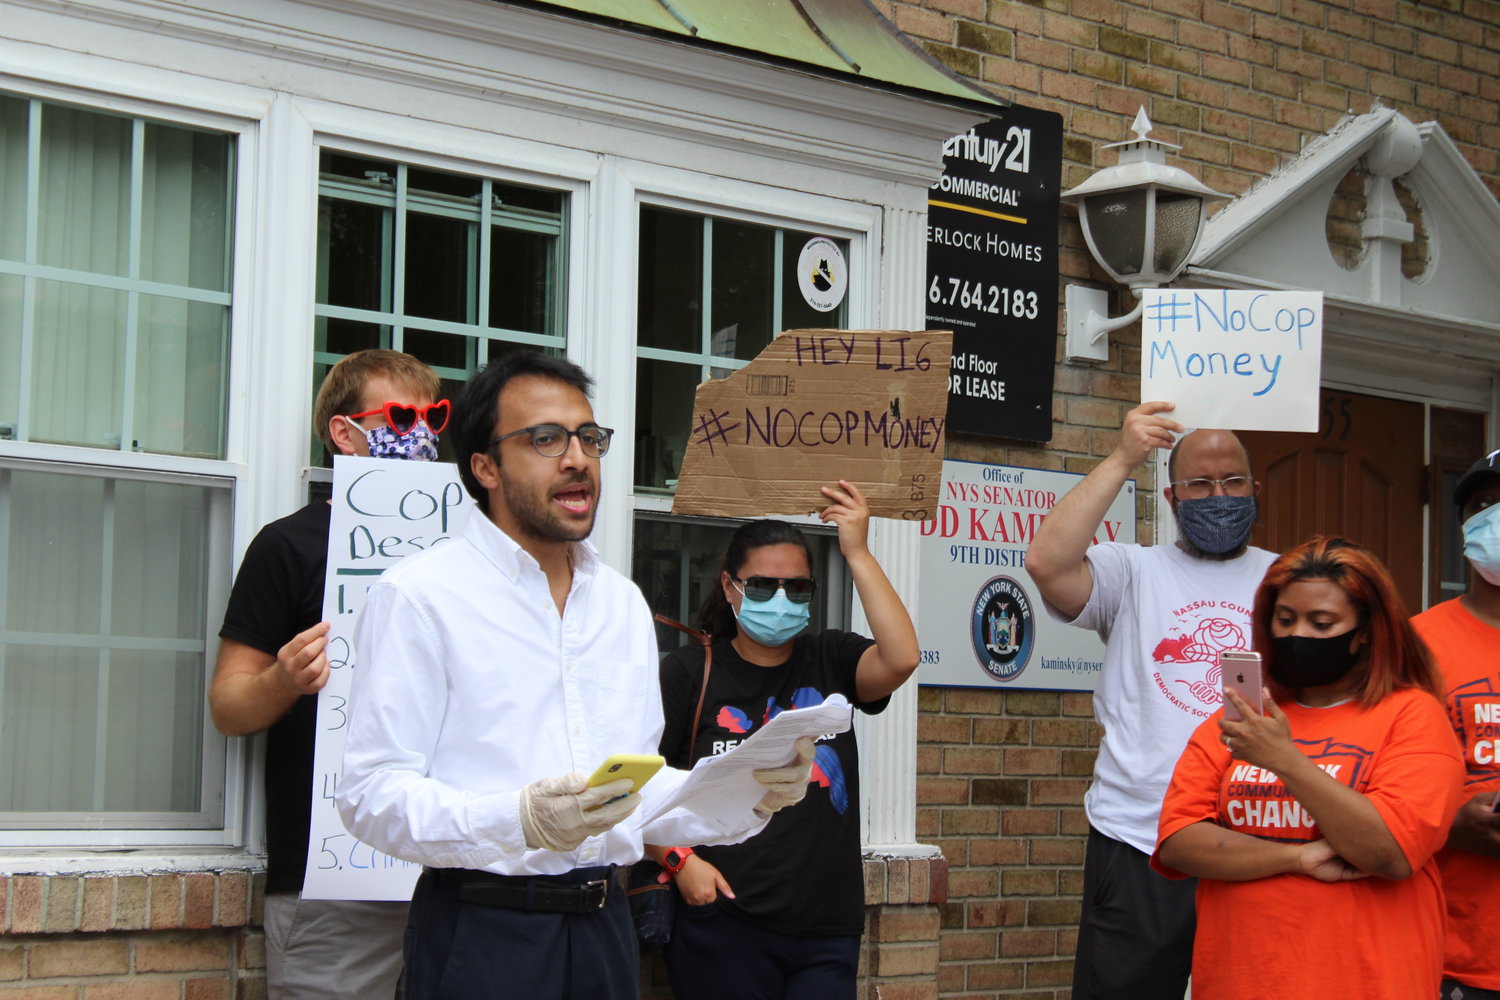 Nikhil Goyal, of Young Long Island for Justice, read a letter that more than three dozen local advocacy organizations have signed asking for “the Long Island six senators” to refuse police union donations and give prior police union funds to groups fighting for racial justice.